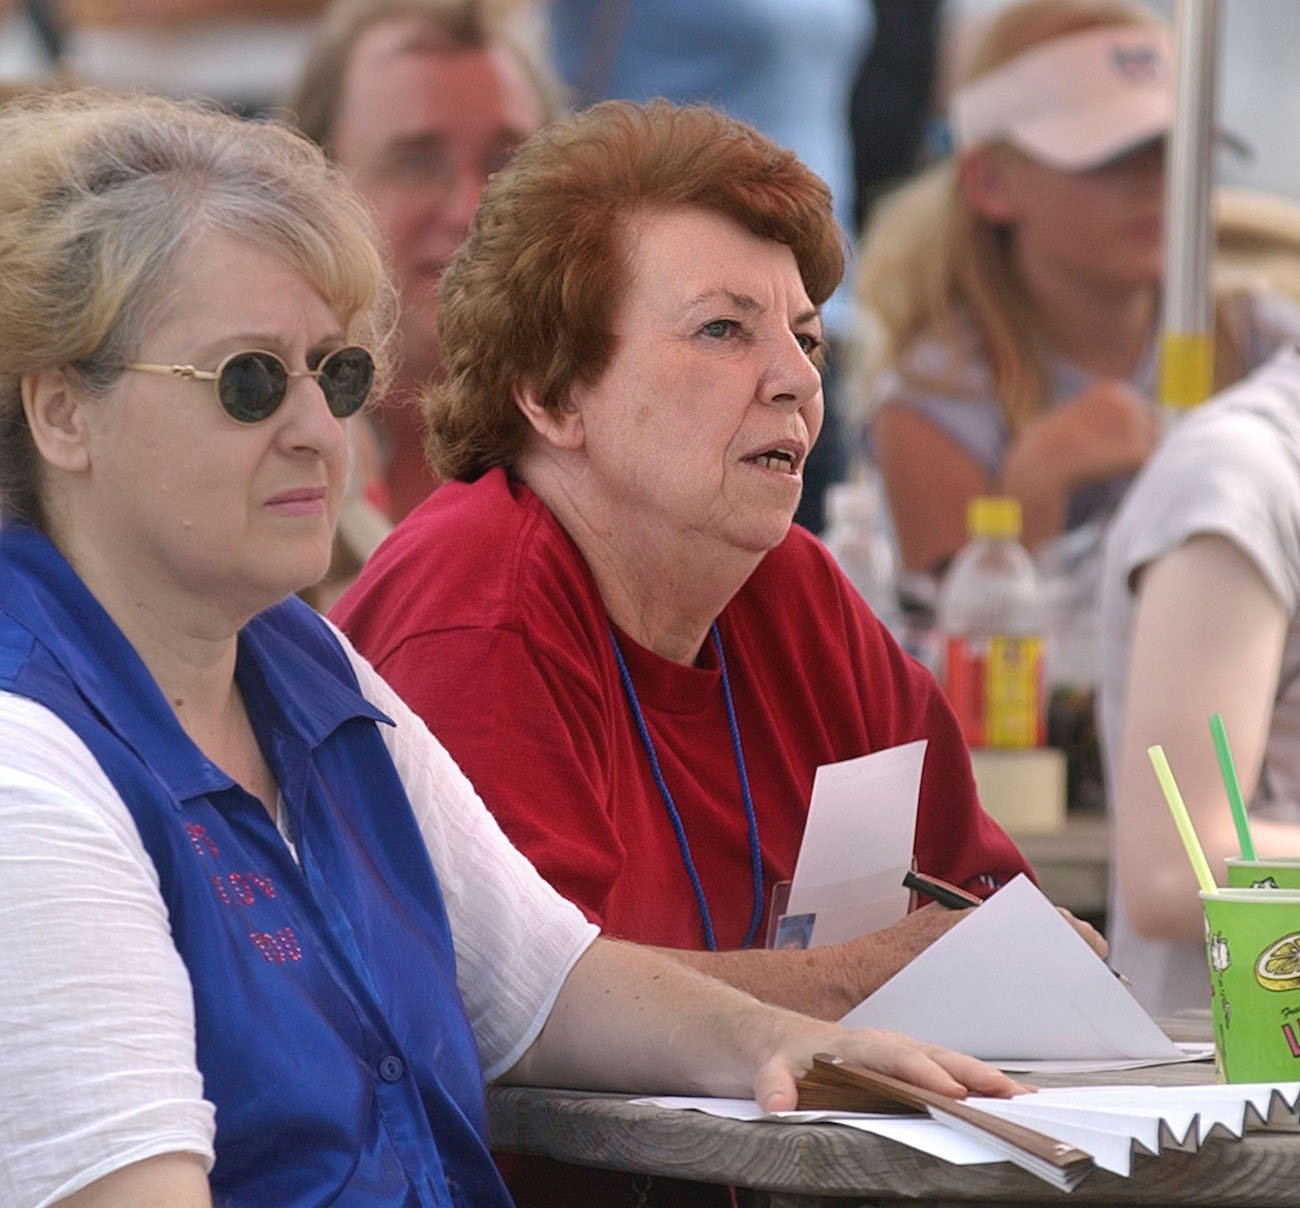 George Harrison's sister, Louise, judging a talent contest at the Abbey Road 'On the River' Beatlemania Festival in Ohio, 2003.